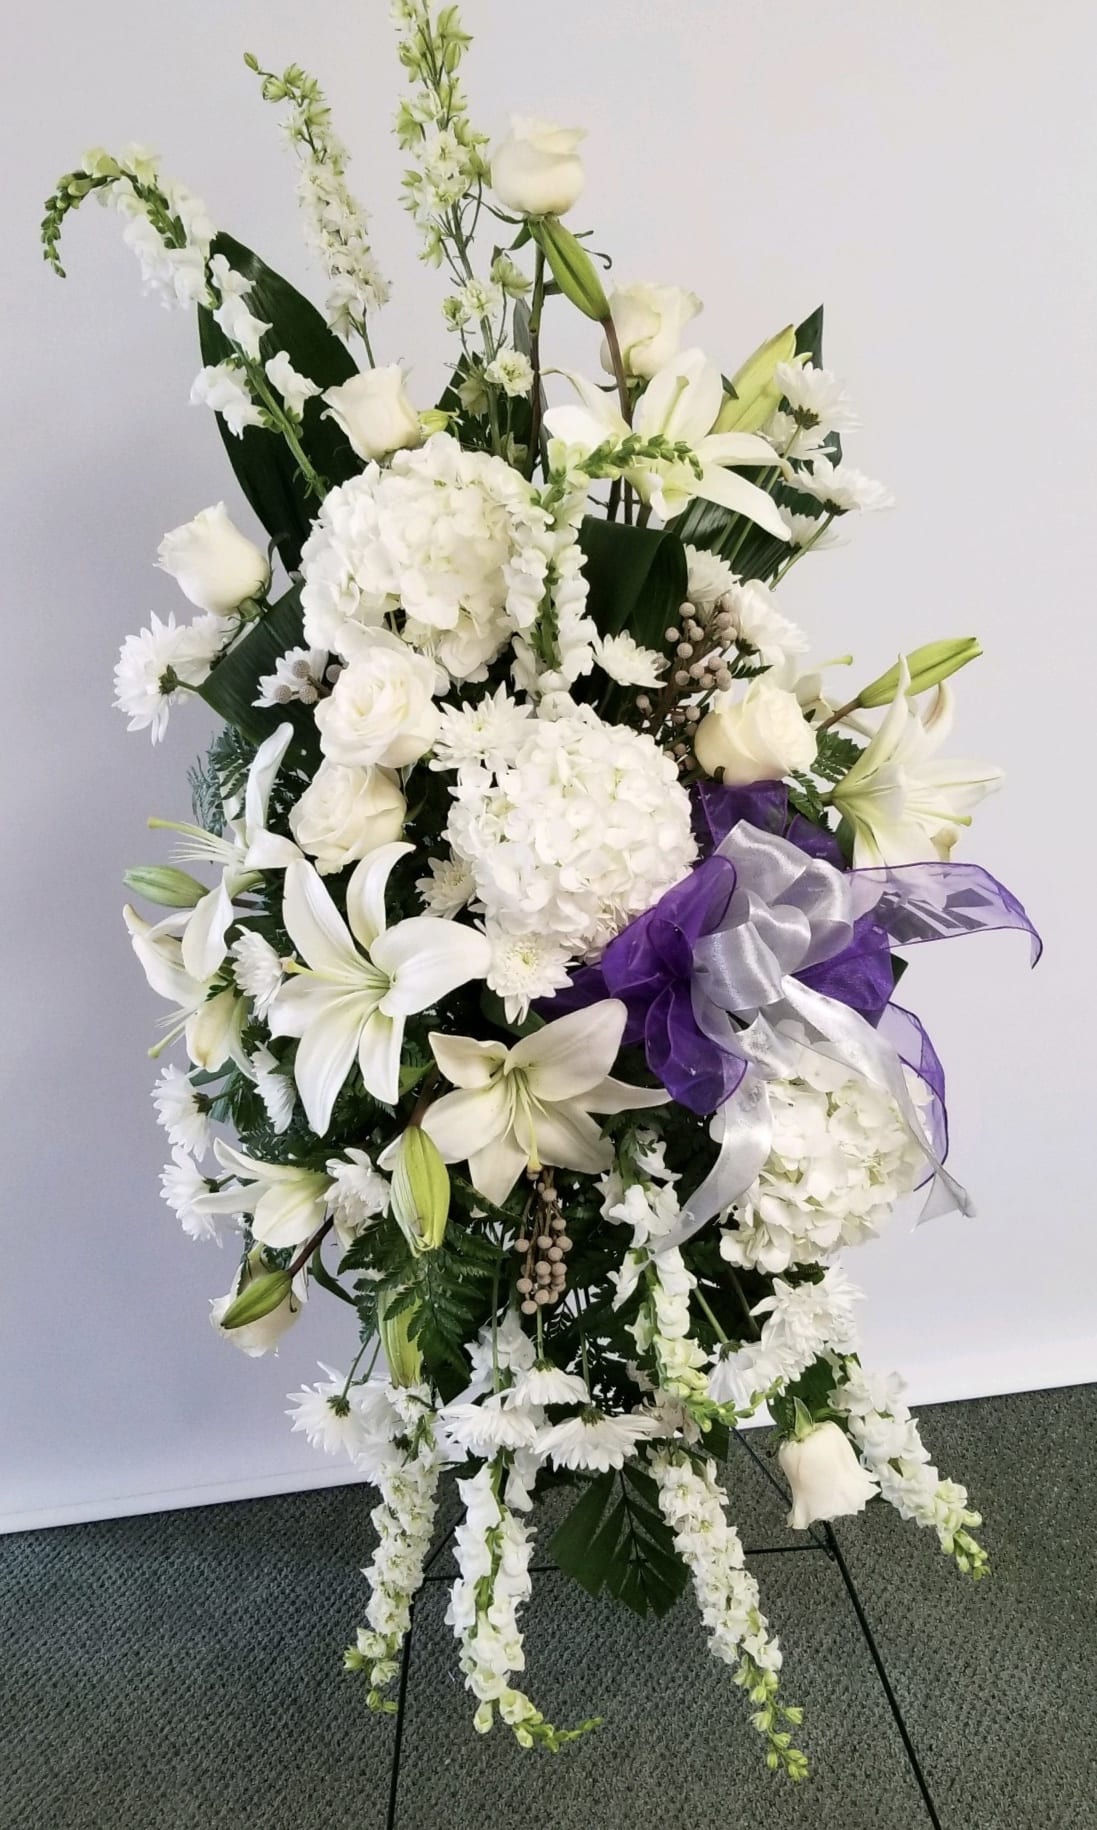  Magnificent Life Spray - A magnificent symbol of love and peace, this pure white and green spray conveys your sympathy with elegance and grace. Ribbon only on request.  This gorgeous array of white roses, white lilies , white hydrangea, white snapdragons, white larkspur, white cushion spray chrysanthemums and berries is accented with green ti leaves and other greenery.      Orientation: One-Sided